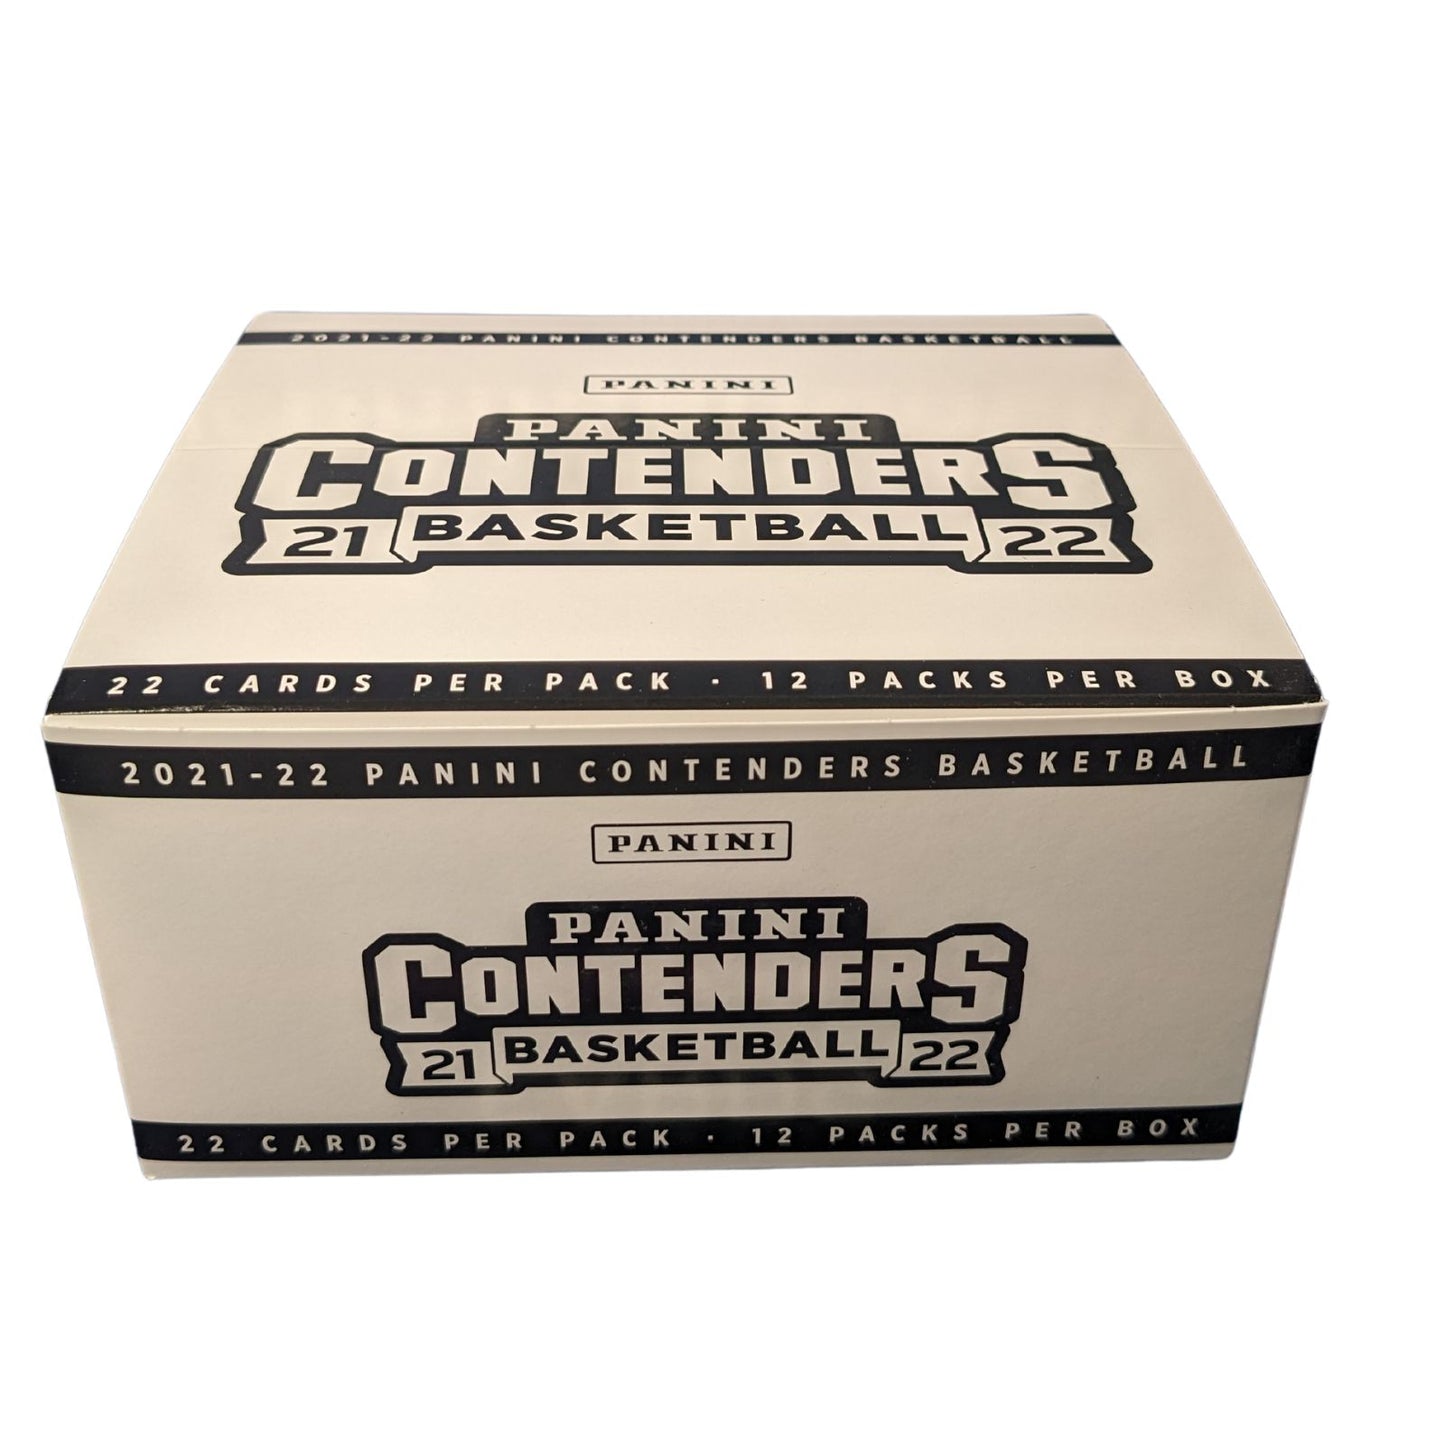 2021-22 Panini Contenders Basketball Cello / Value / Fat Pack Box (12 paquets)